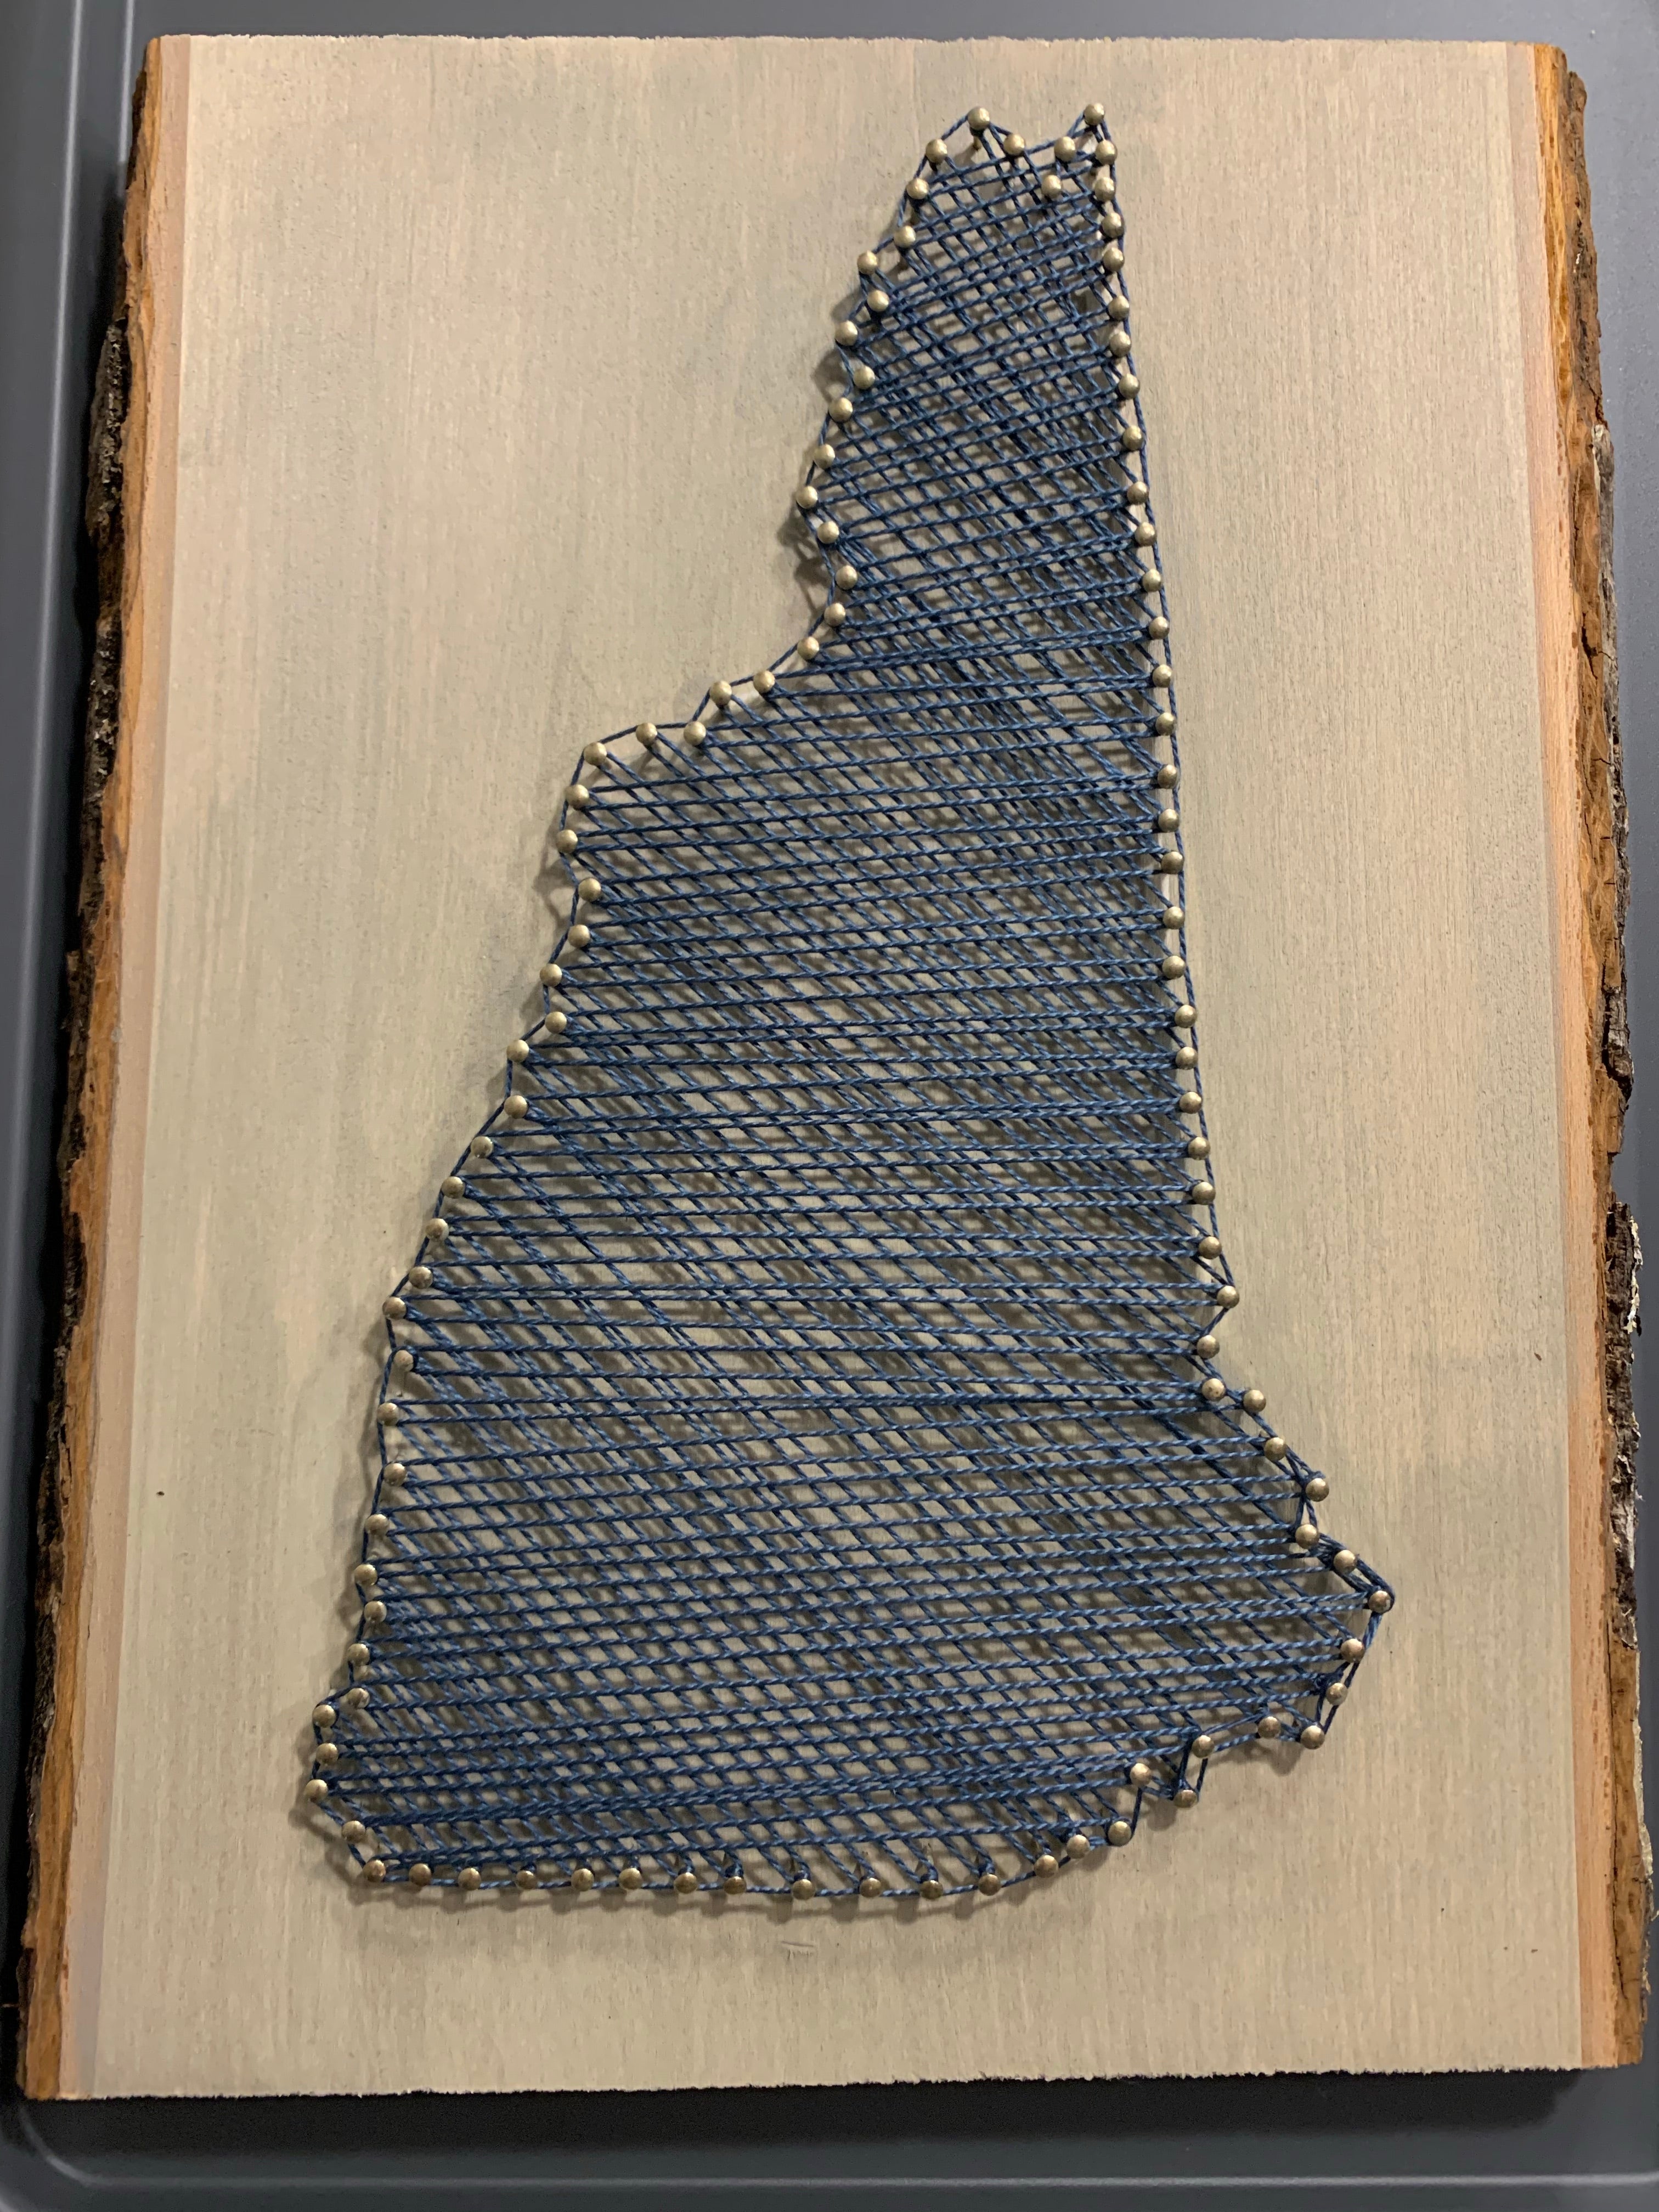 State of New Hampshire String Art